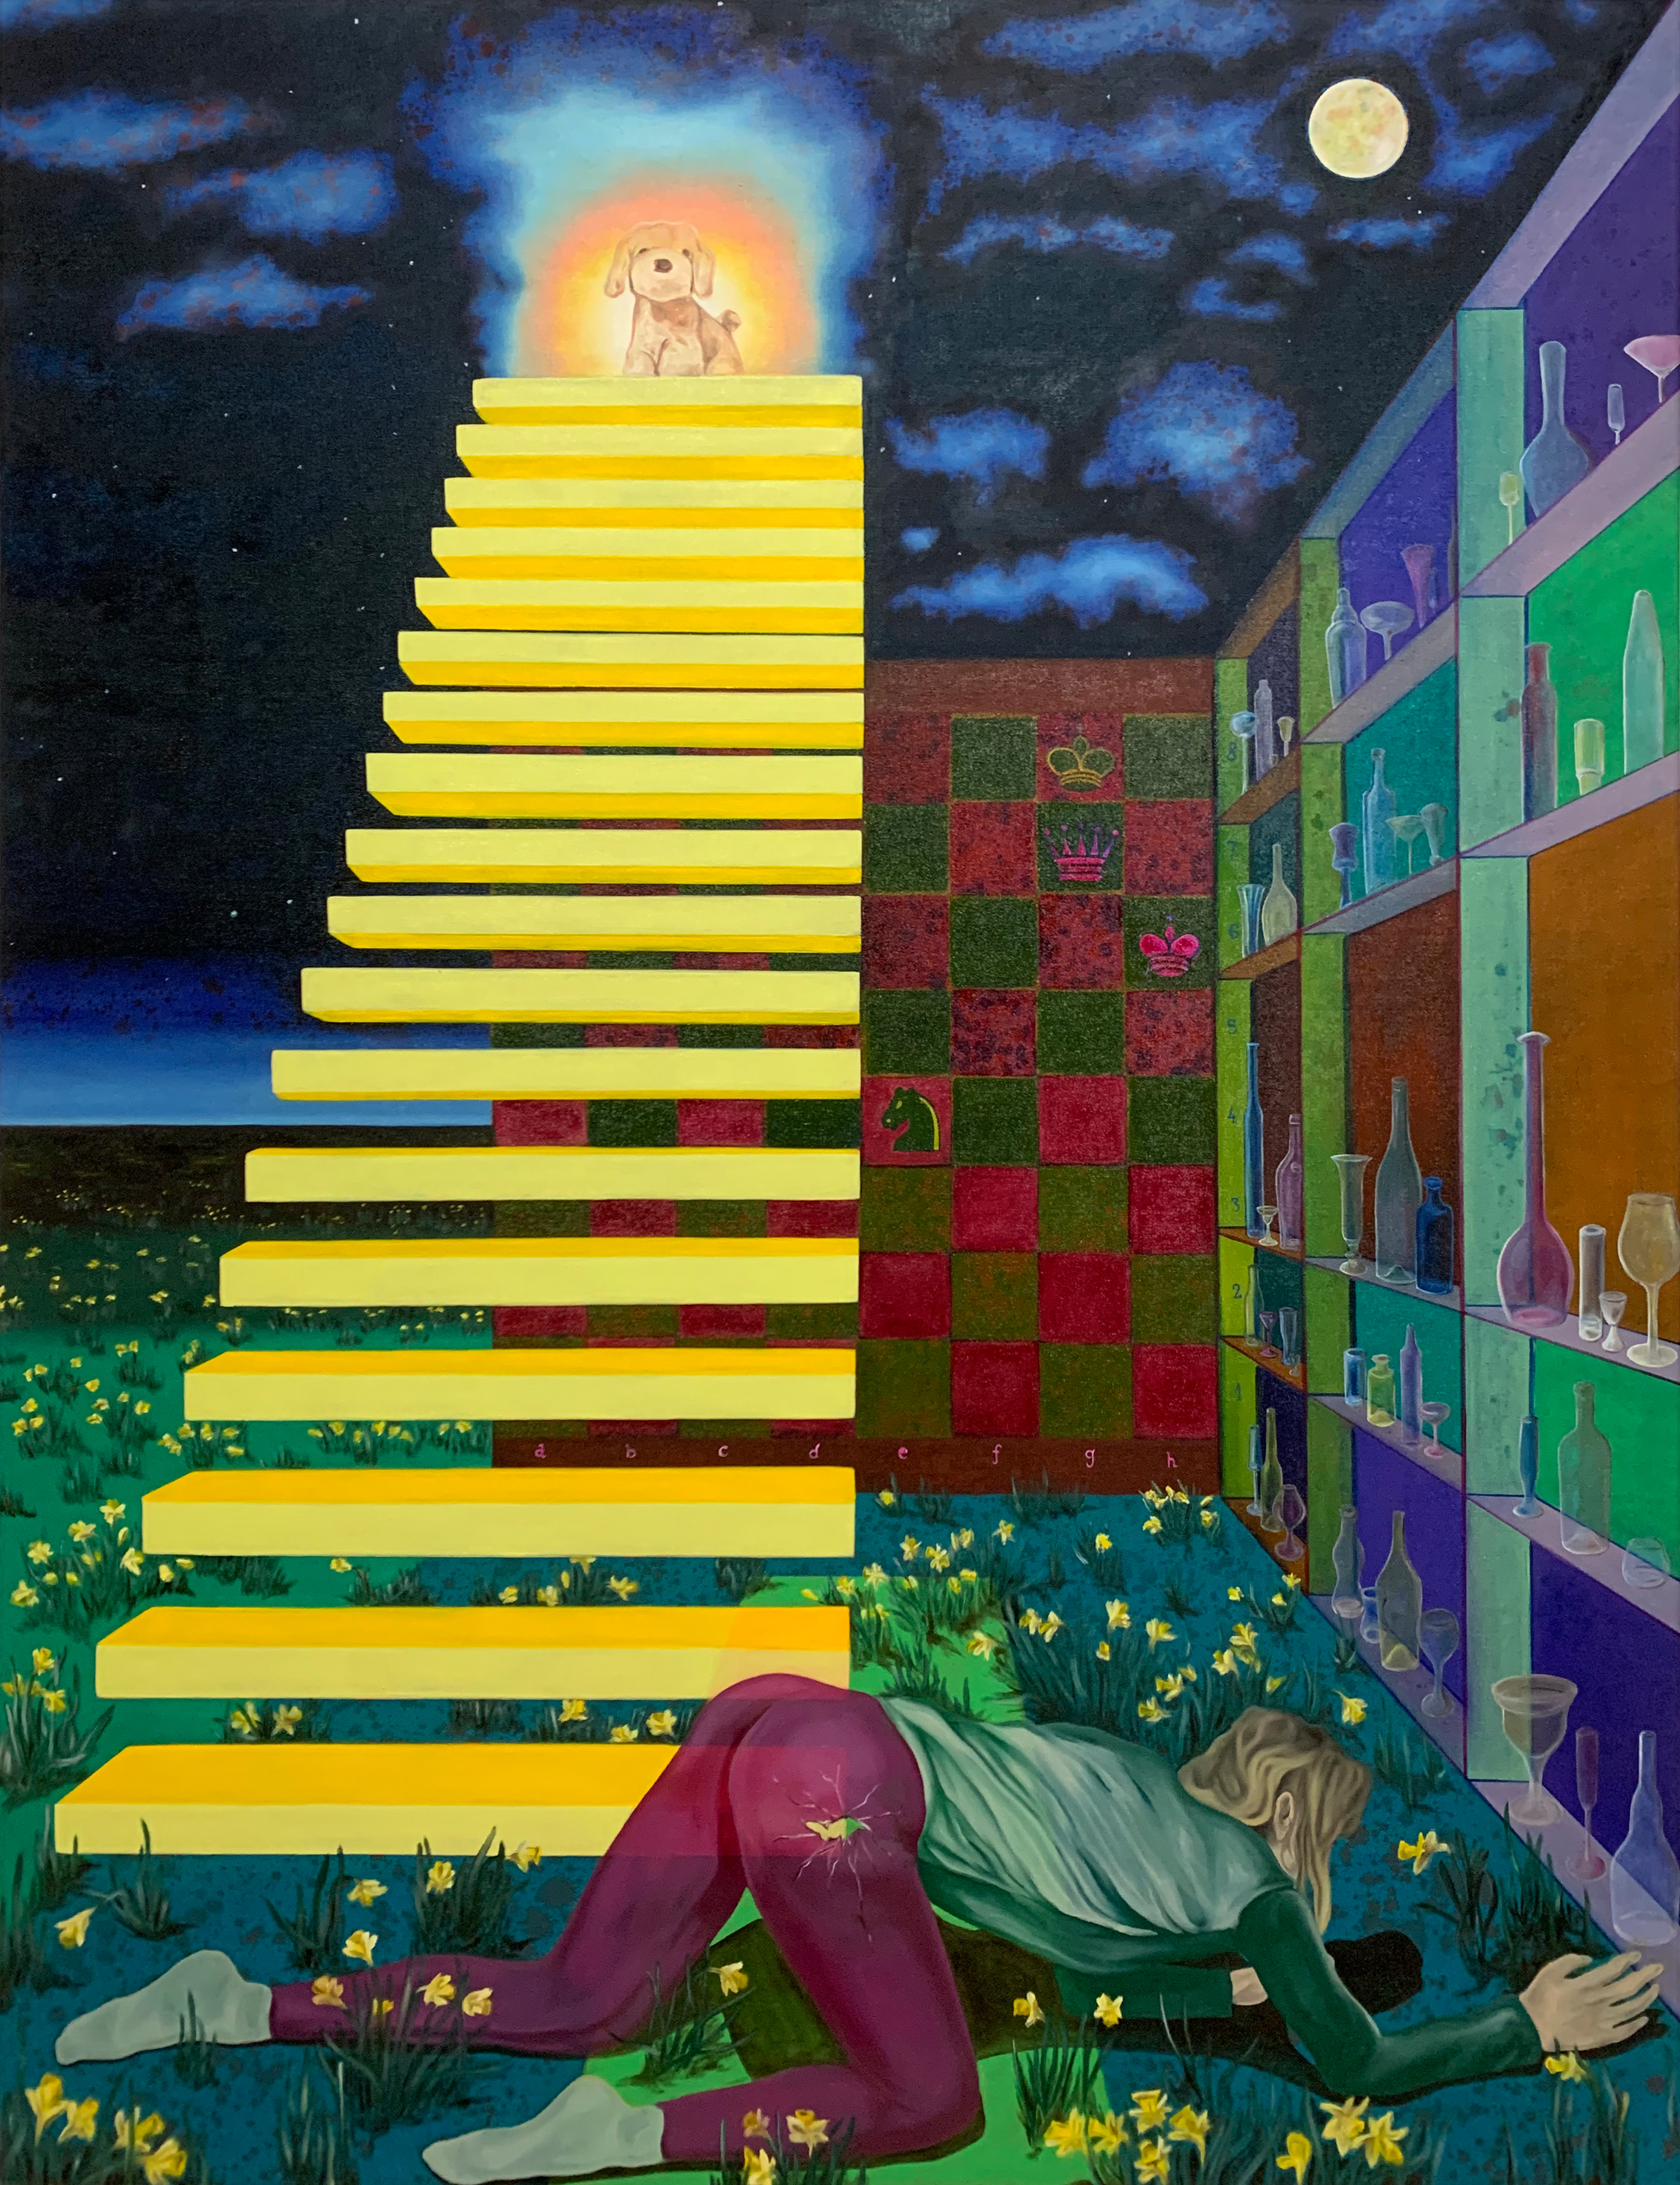 The Downfall of Bonnie & Hyde
2022
oil on canvas
170 x 130cm